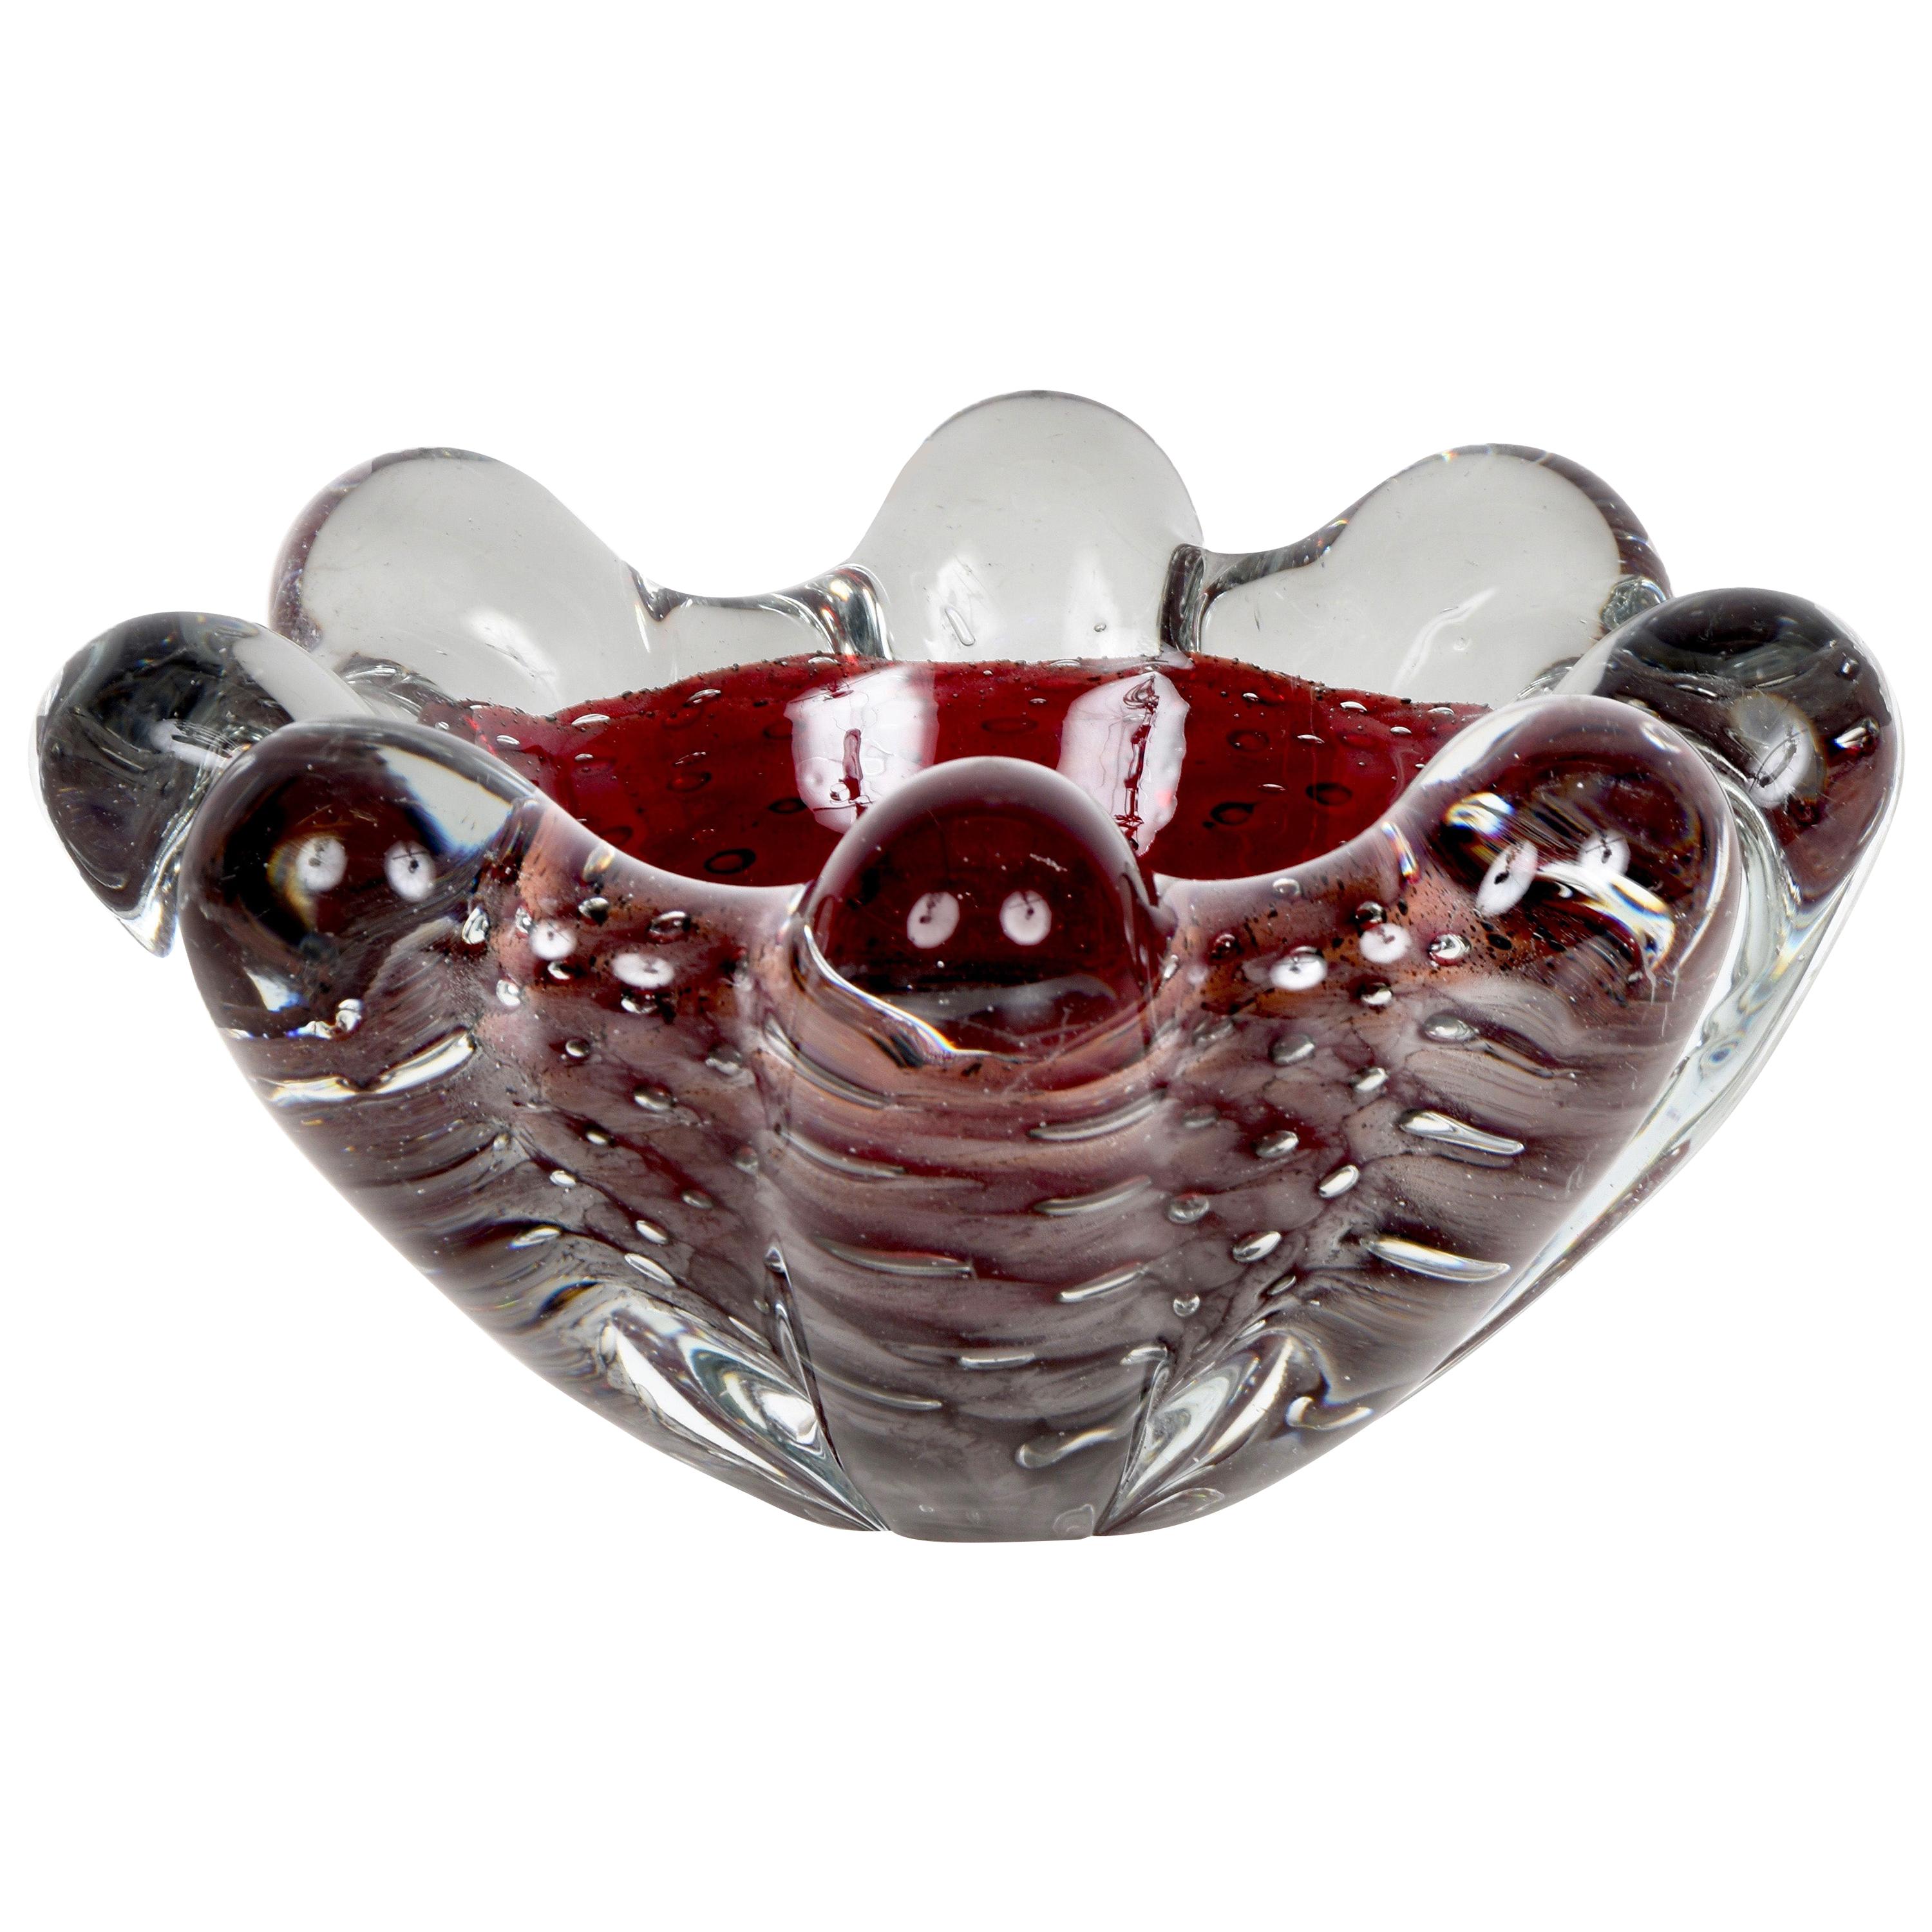 Midcentury Seguso Crystal and Purple Air-Bubbled Murano Glass Italian Bowl 1950s For Sale